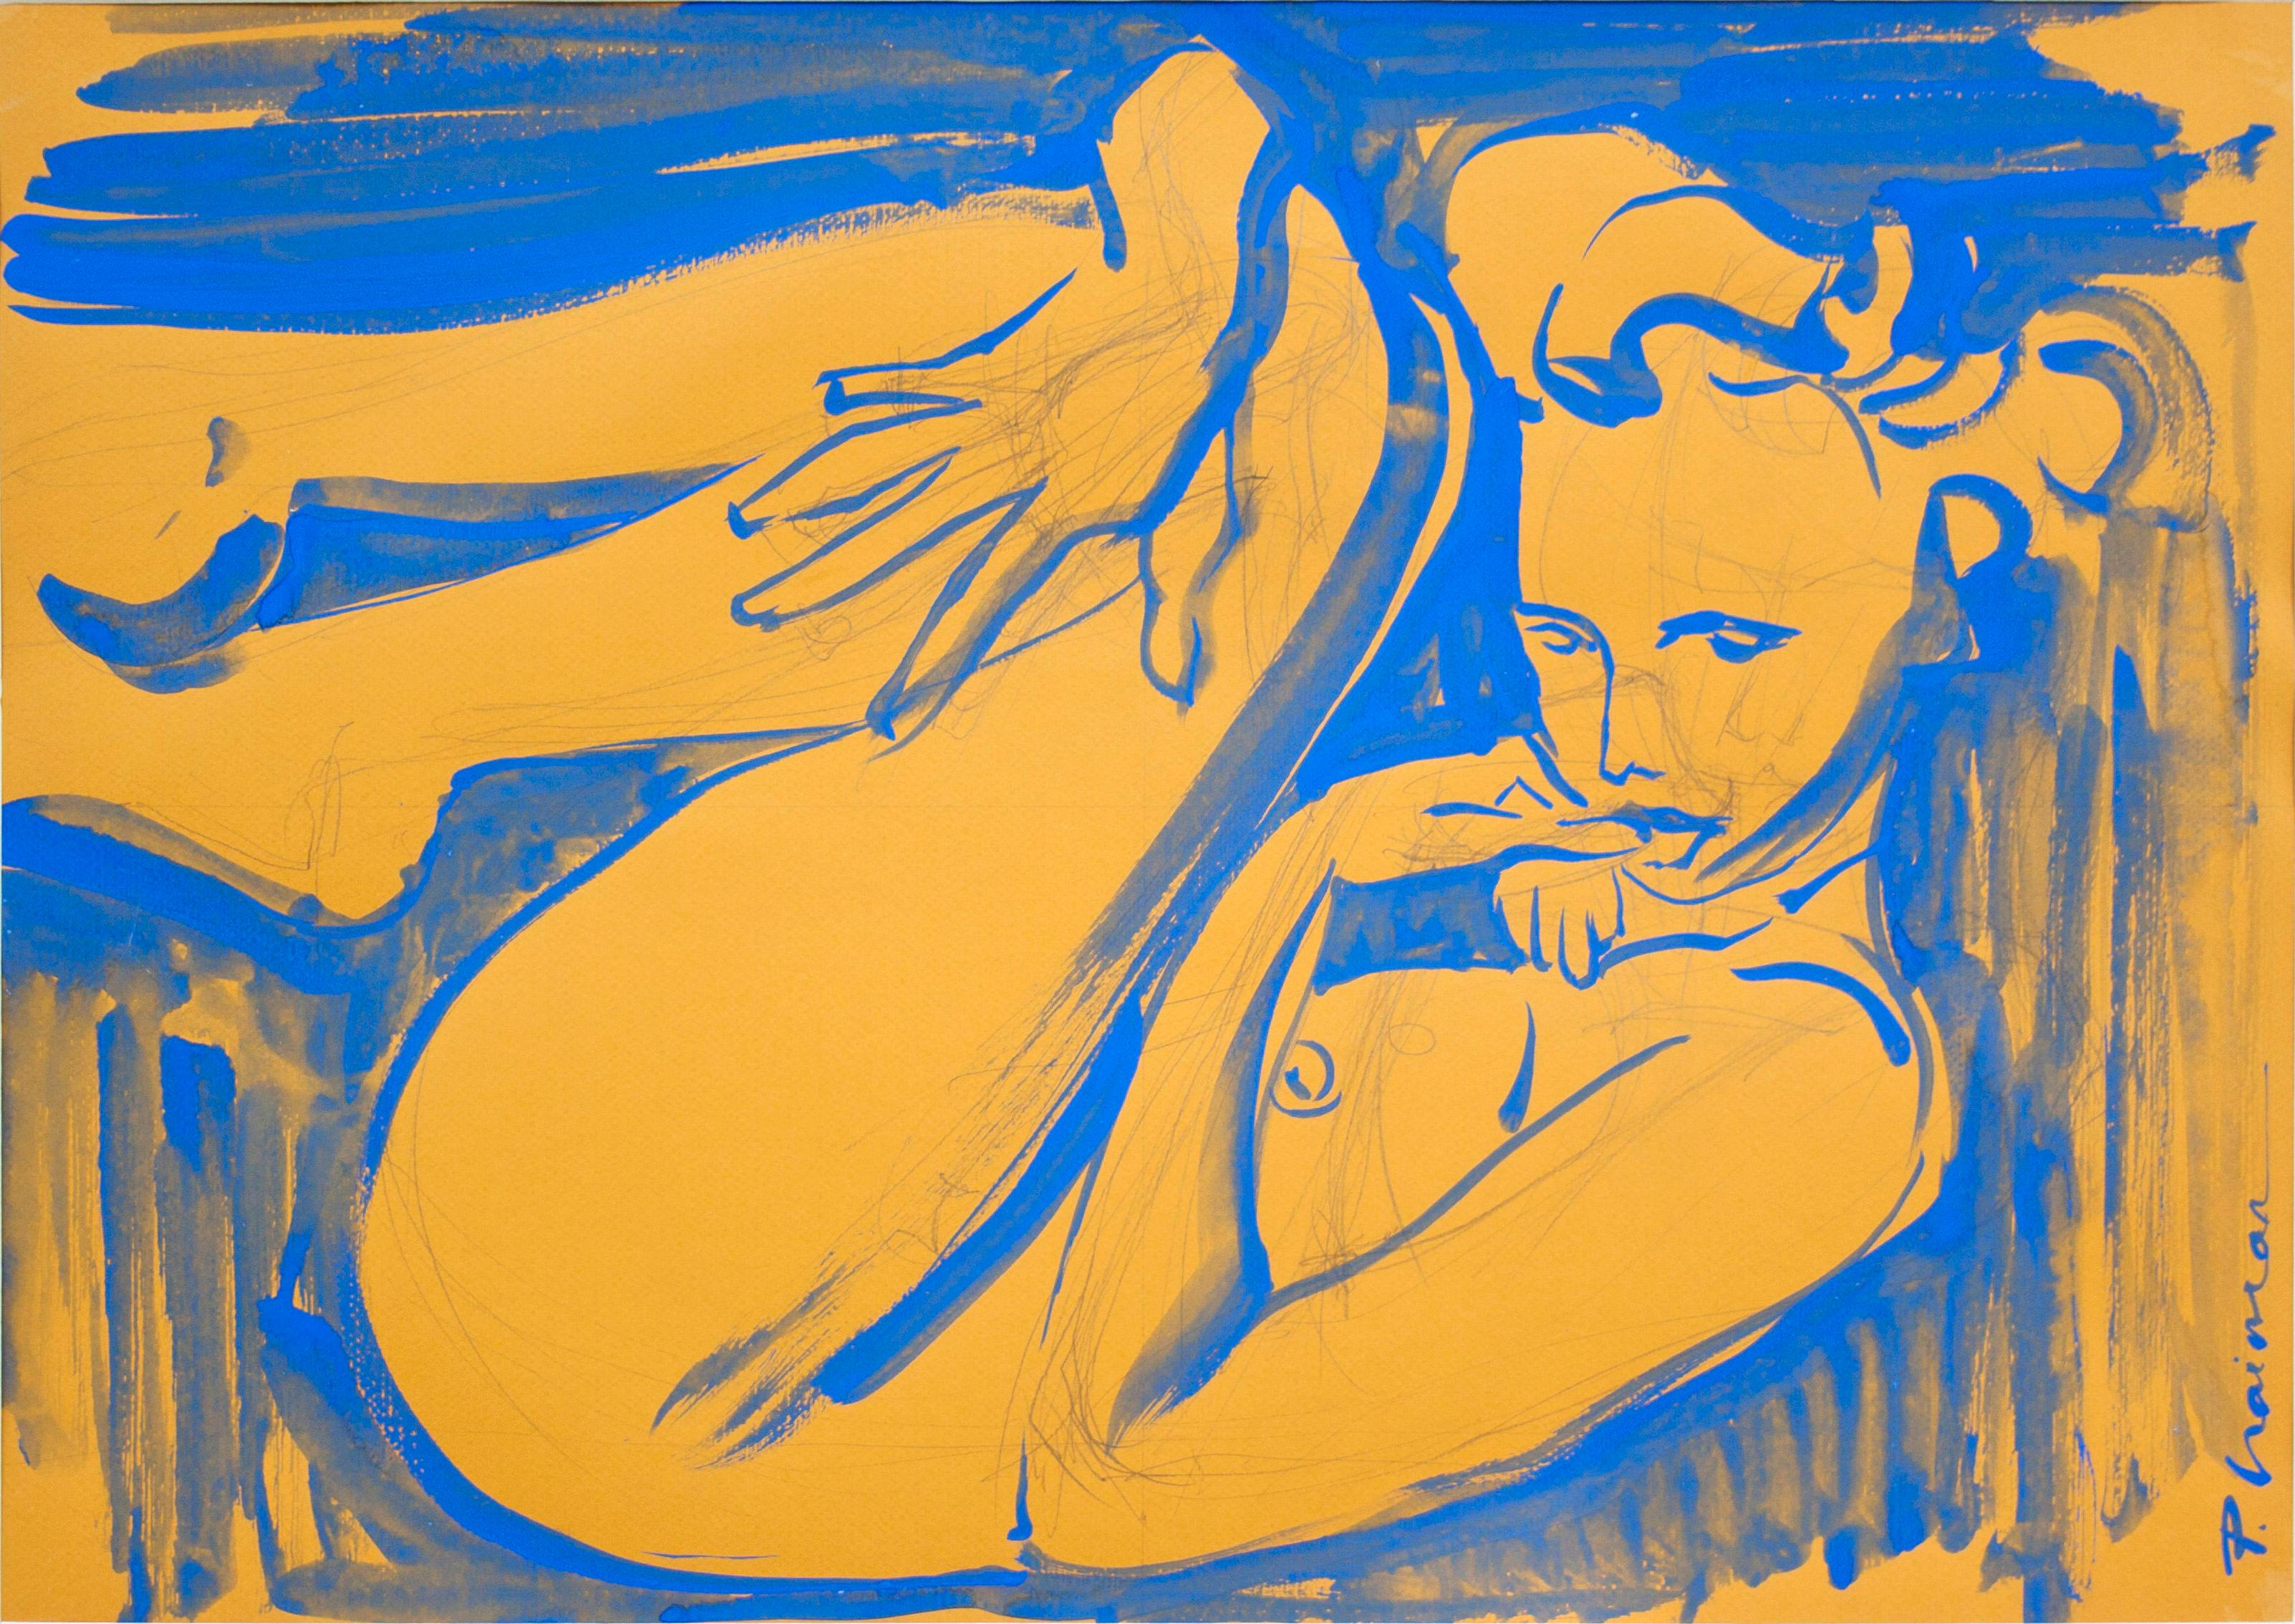 
Blue Nude. Inspired by Matisse.
Part of my "Nude in Interior" series
Original, signed.
50x70cm / 20x28in actual size

ink, graphite, tempera on paper
Shipping rolled in a tube from New York, directly from the artist.